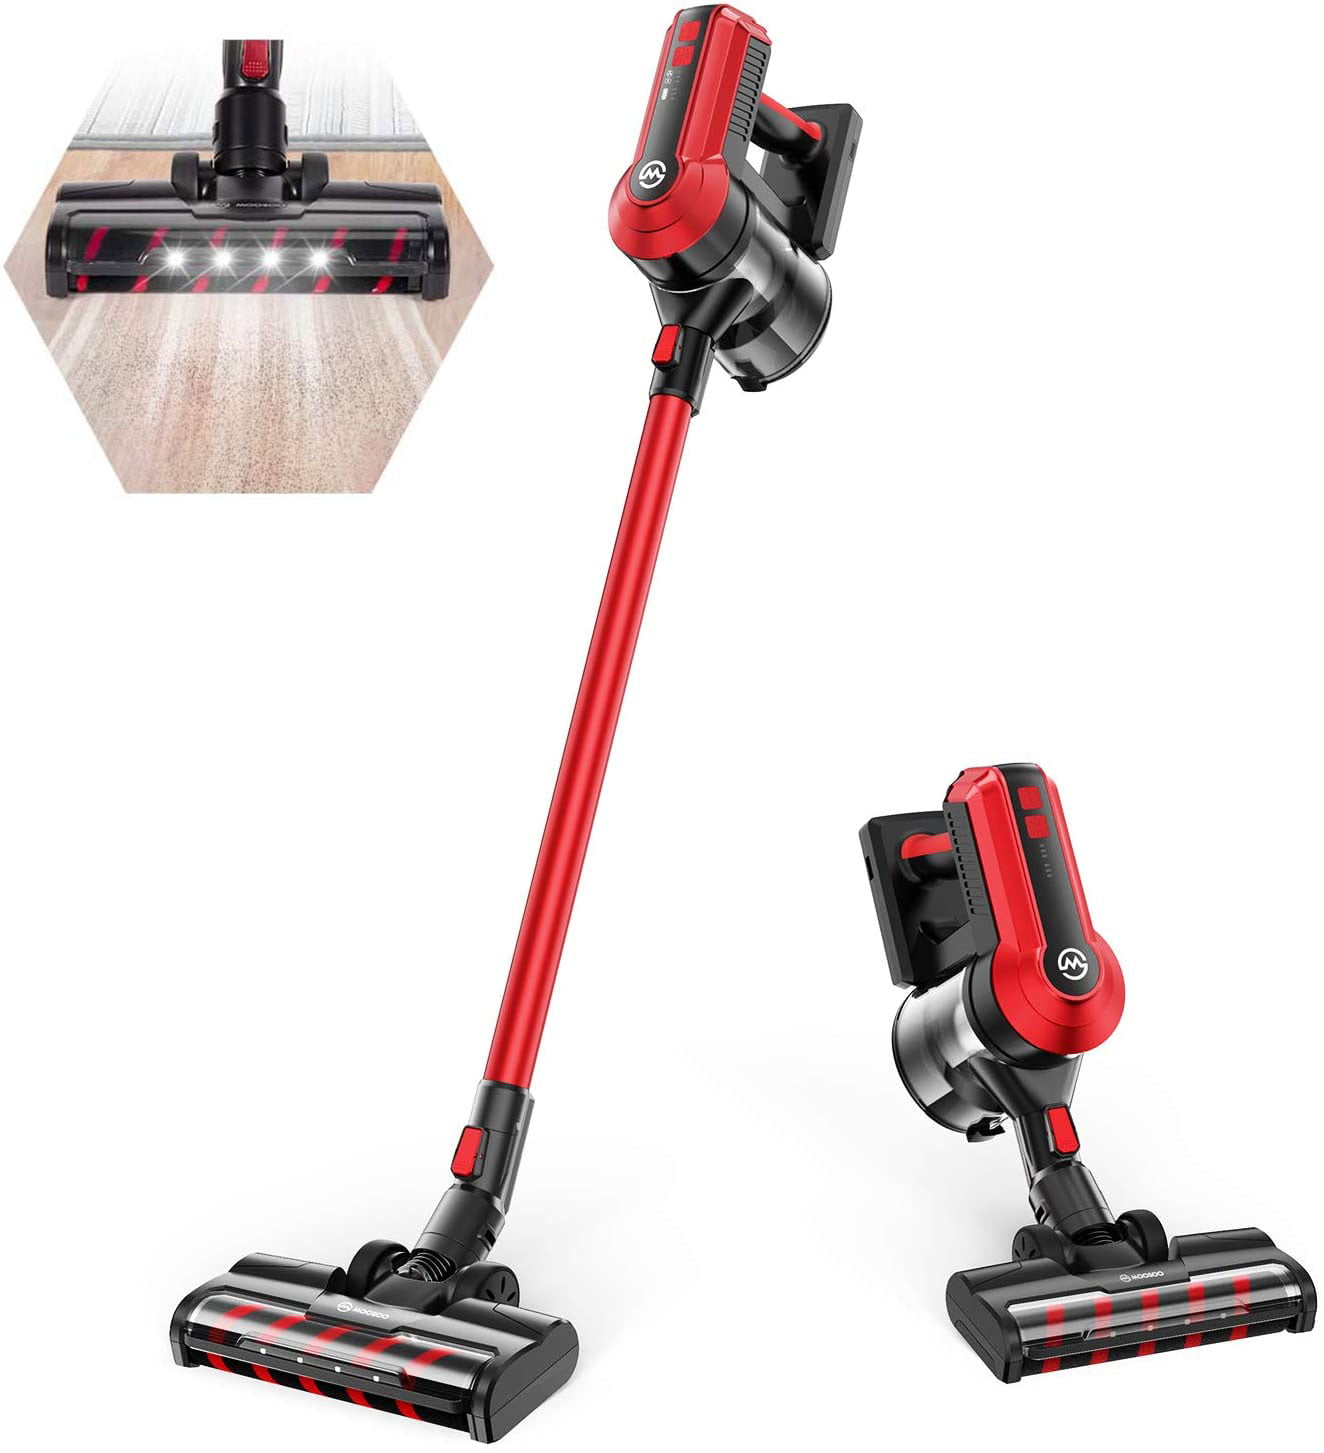 Moosoo K23 Cordless Vacuum 4in1 Stick Vacuum with 3 Suction Modes for